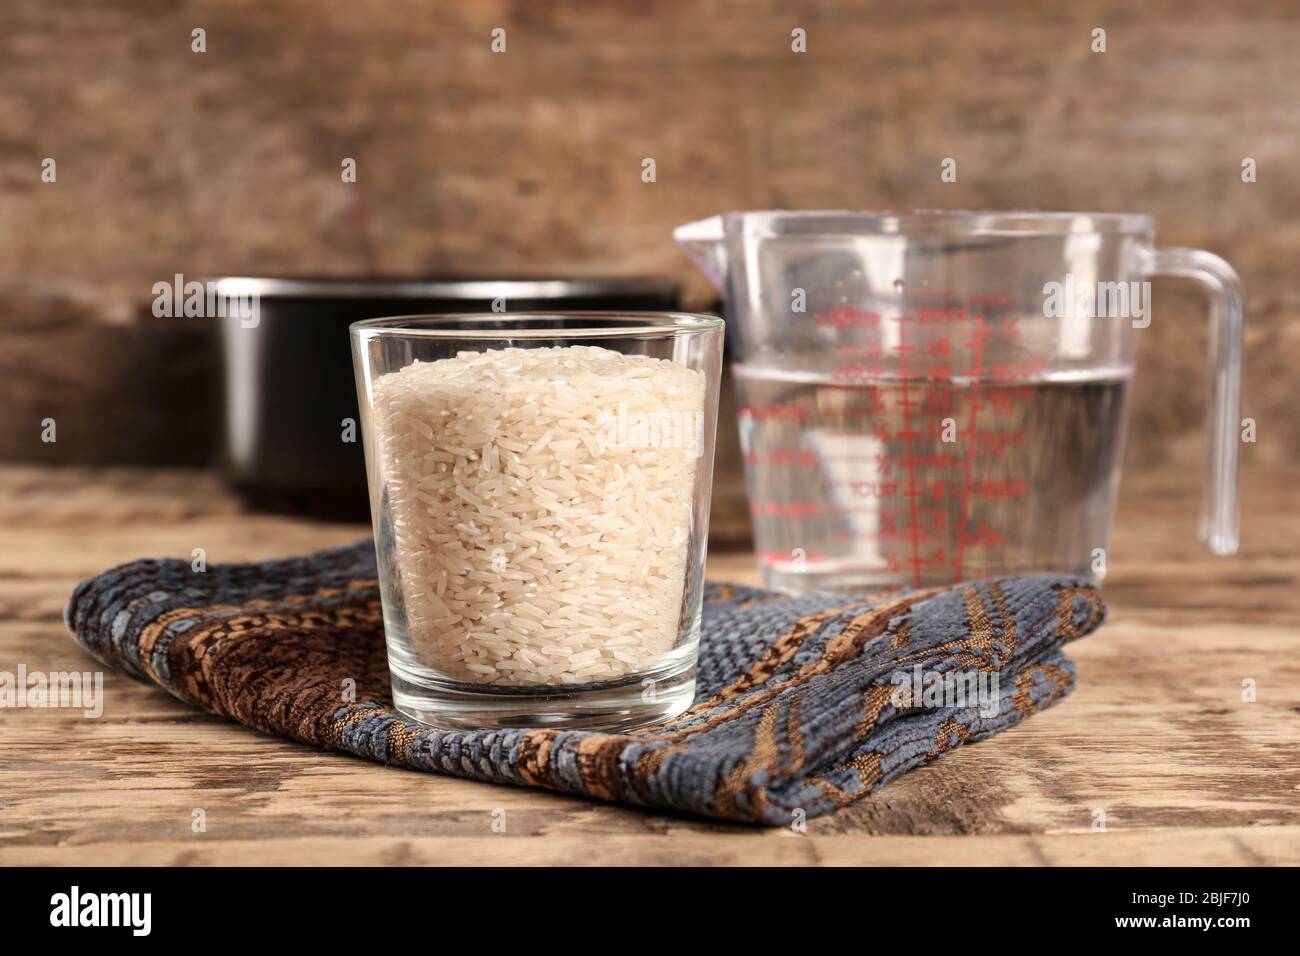 https://c8.alamy.com/comp/2BJF7J0/glass-of-rice-and-measuring-jug-with-water-on-wooden-table-2BJF7J0.jpg